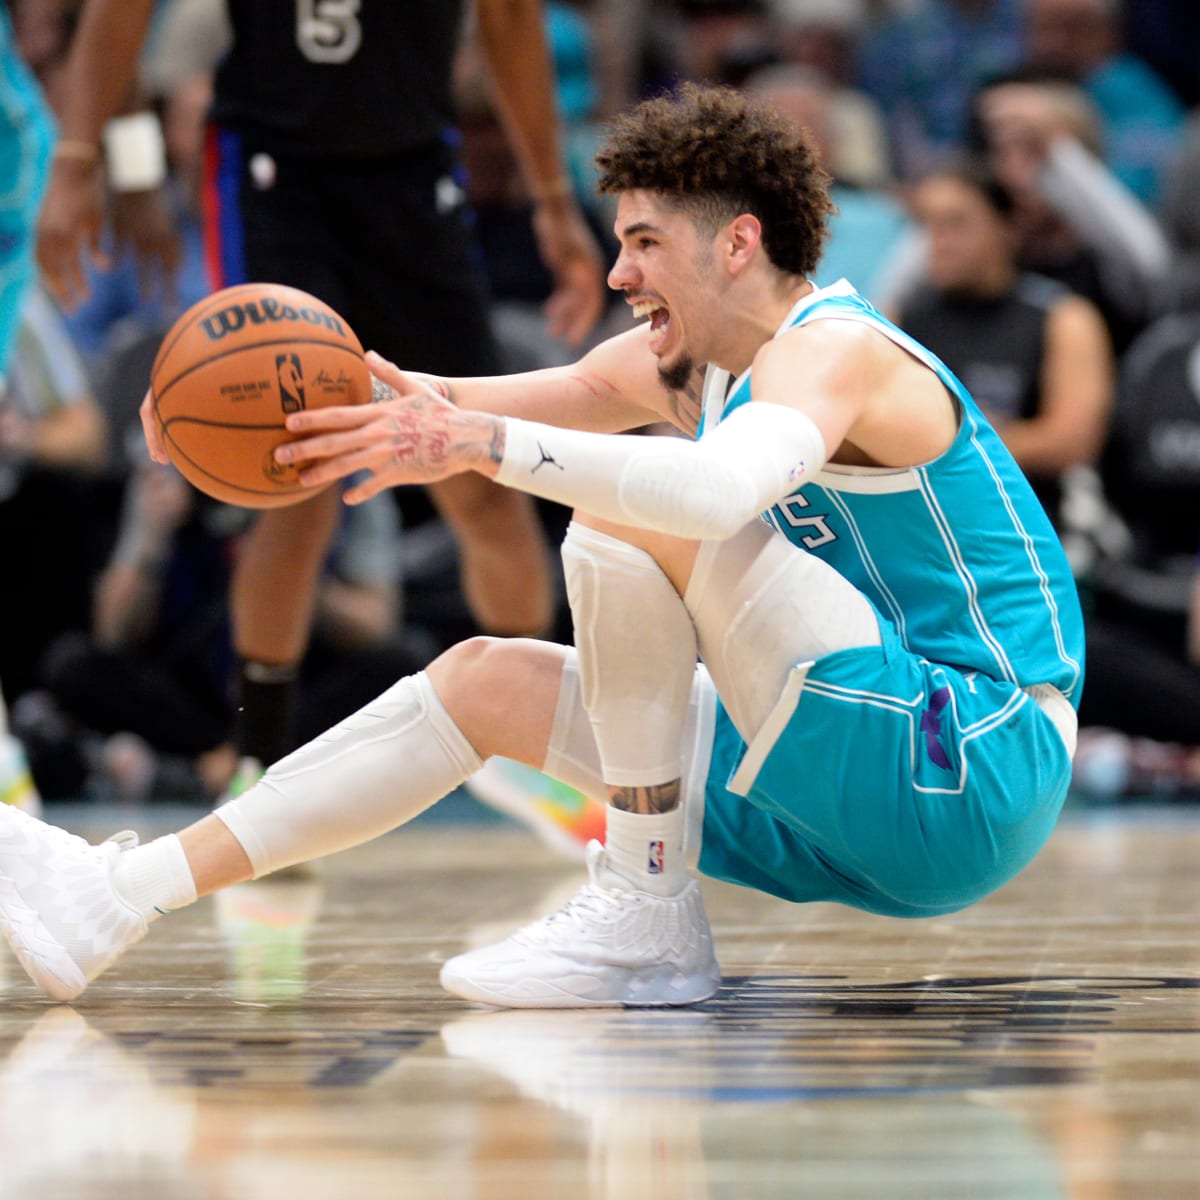 Hornets star LaMelo Ball fractures right ankle in non-contact play